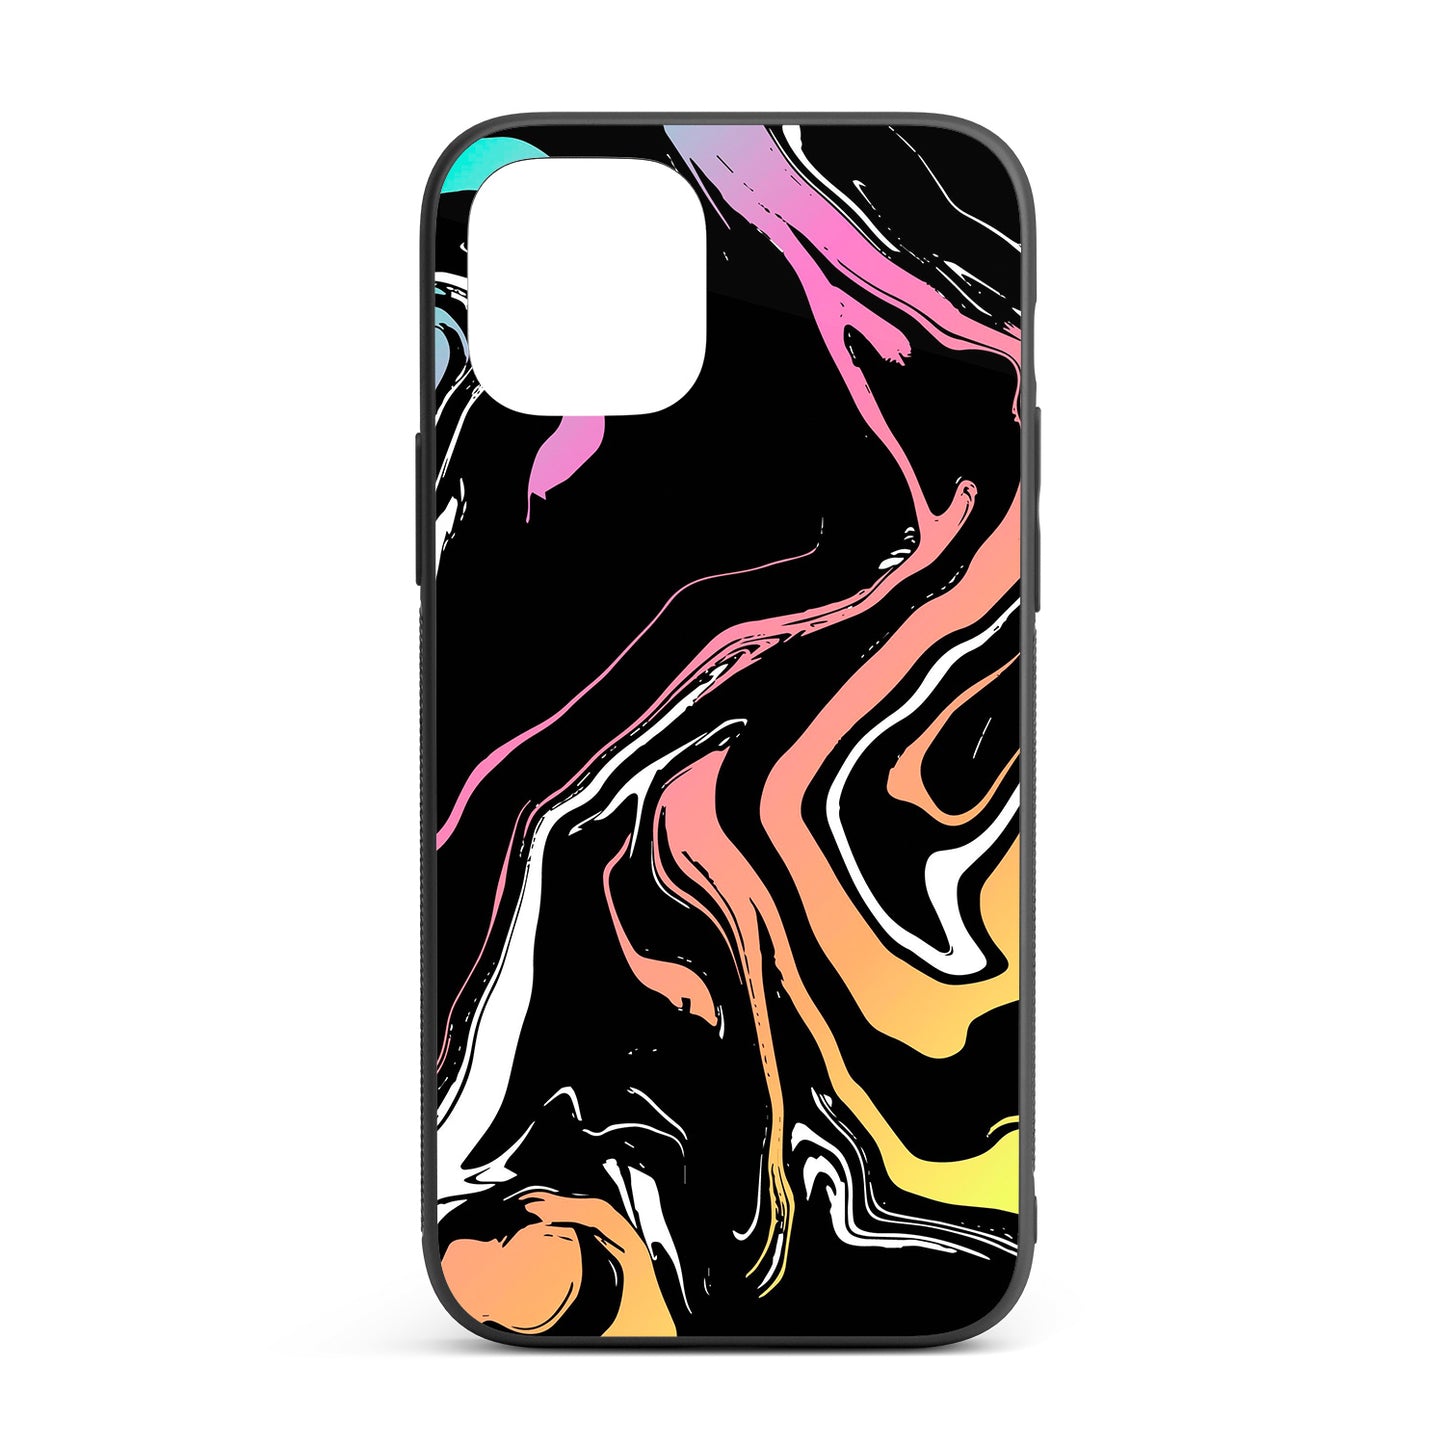 Acid marble iPhone glass case